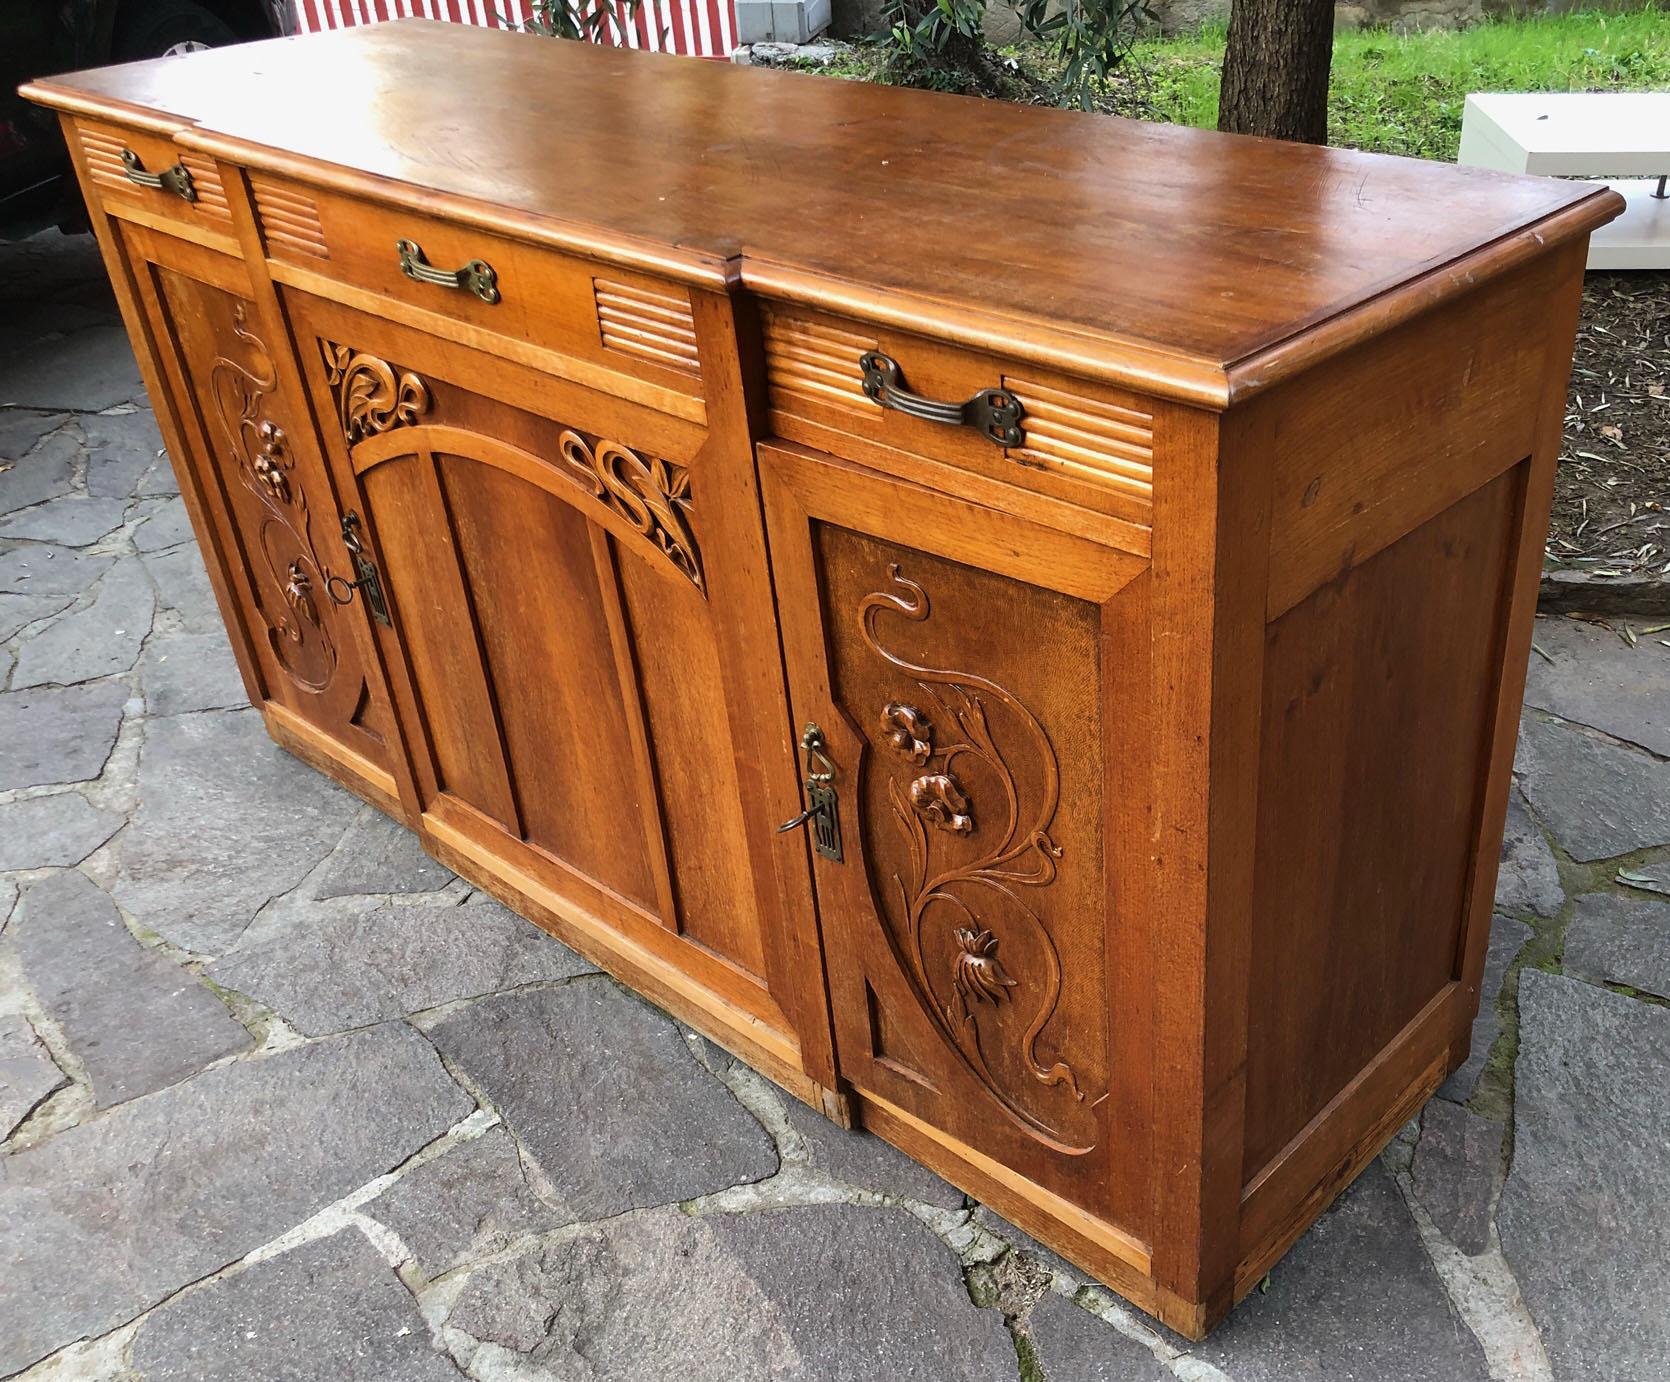 Original Italian Art Noveau Sideboard in Honey-Colored Walnut with Three Drawers In Good Condition For Sale In Buggiano, IT